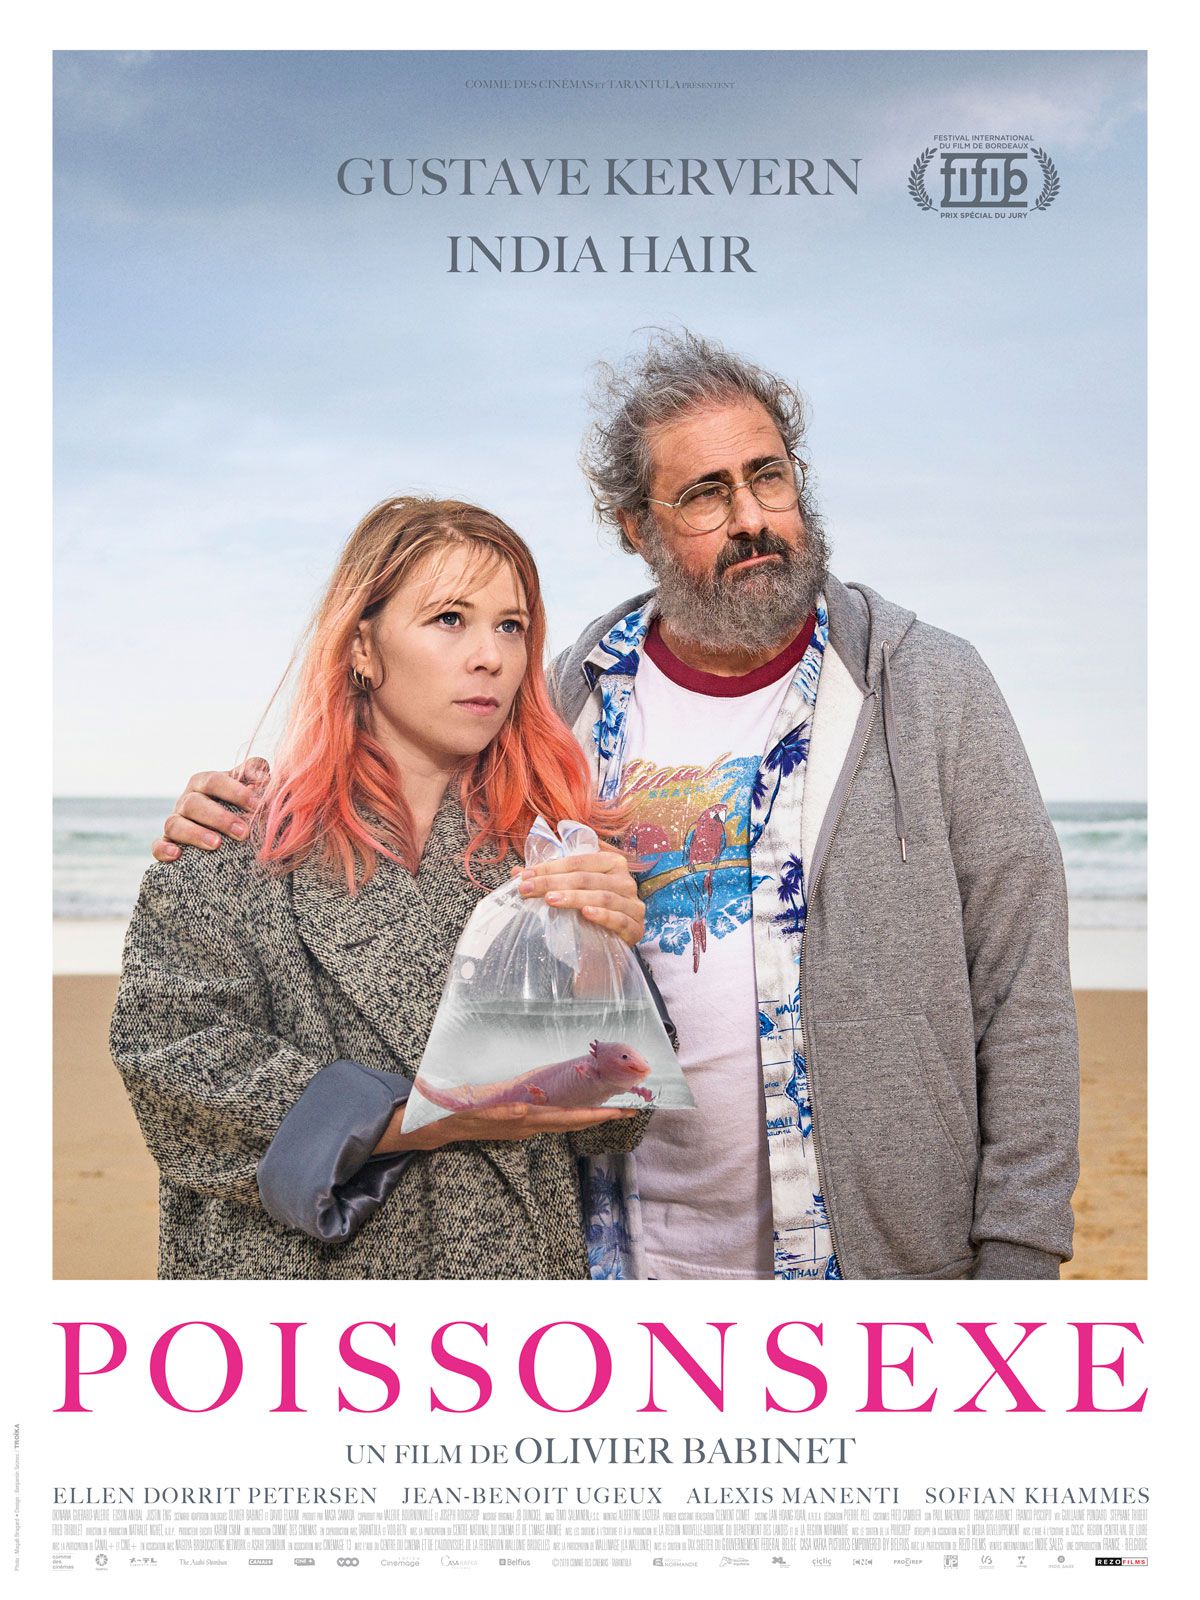 Poissonsexe - Film (2020) streaming VF gratuit complet